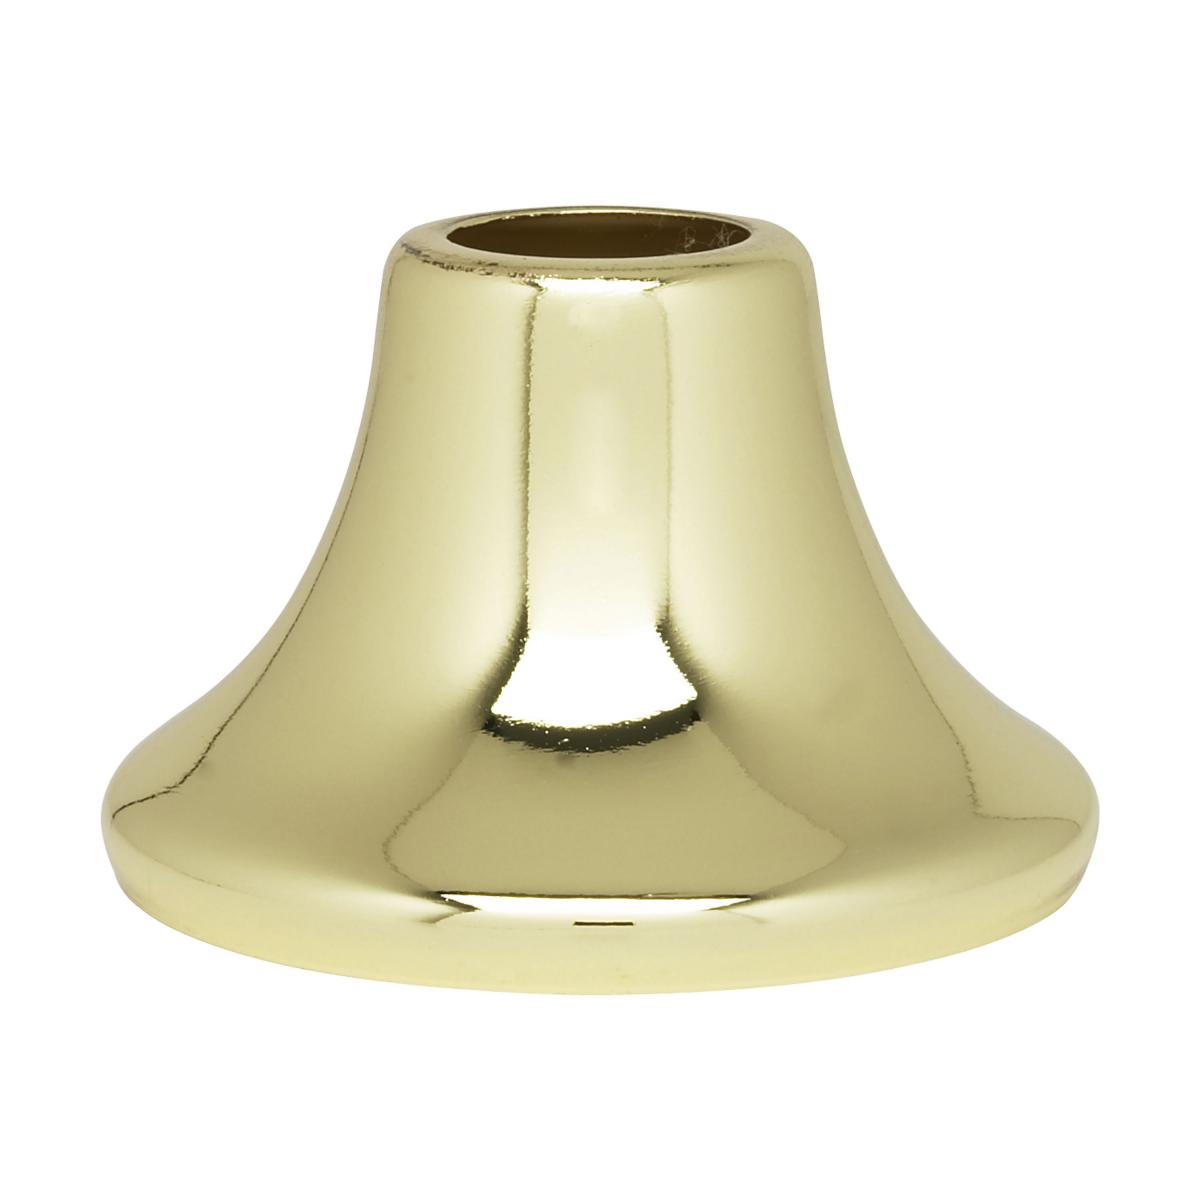 Satco 90-2189 Flanged Steel Neck 9/16" Hole 1-3/16" Height 3/4" Top 1-3/4" Bottom Seats Brass Plated Finish